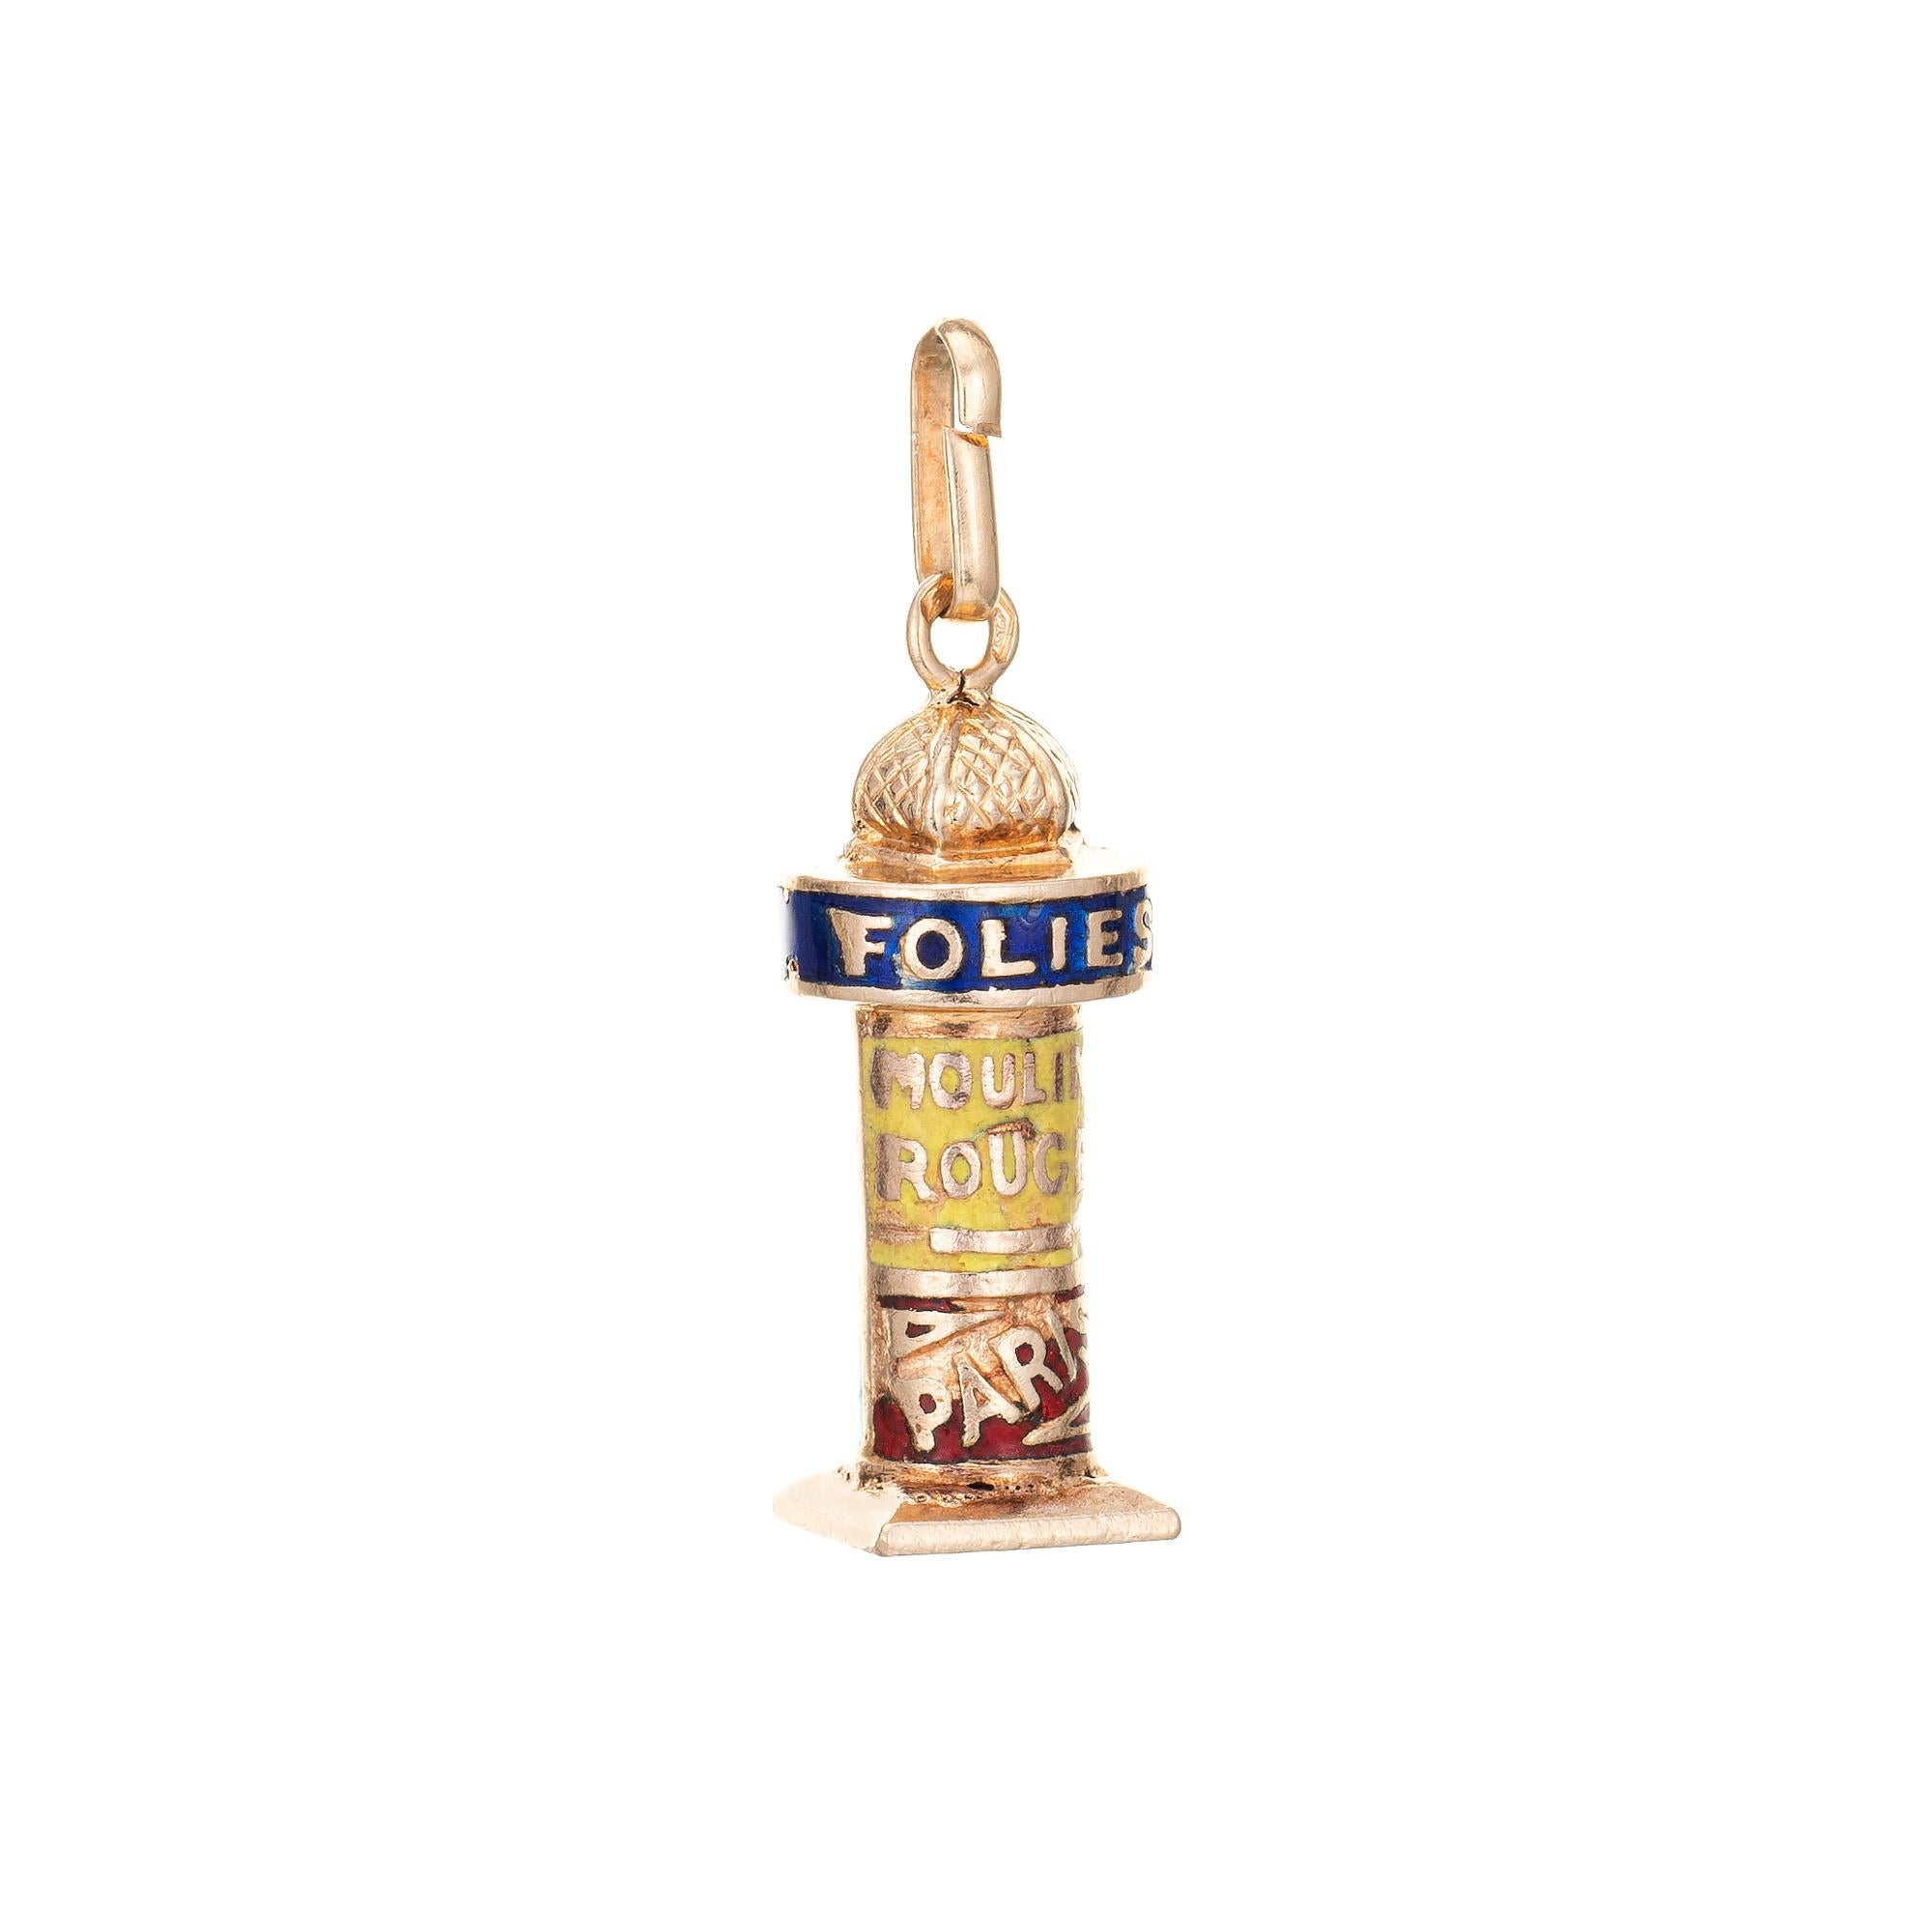 Finely detailed vintage French enamel kiosk charm crafted in 18k yellow gold.  

The colorful polychrome enamel charm is cylindrical in design with a textured domed top and square base. The charm highlights popular entertainment venues in Paris from